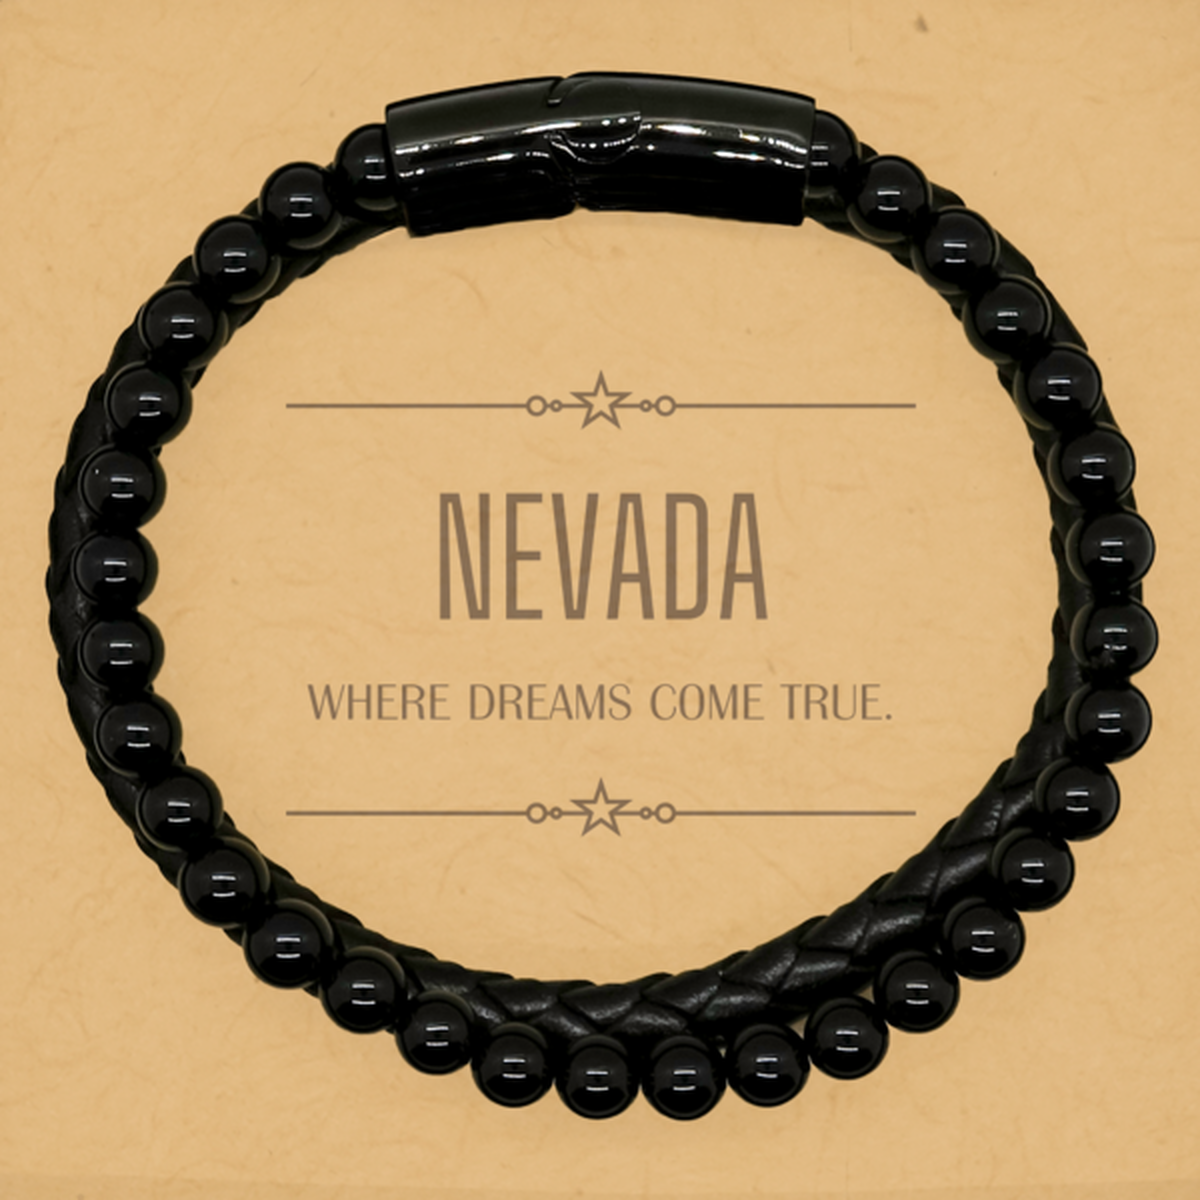 Love Nevada State Stone Leather Bracelets, Nevada Where dreams come true, Birthday Inspirational Gifts For Nevada Men, Women, Friends